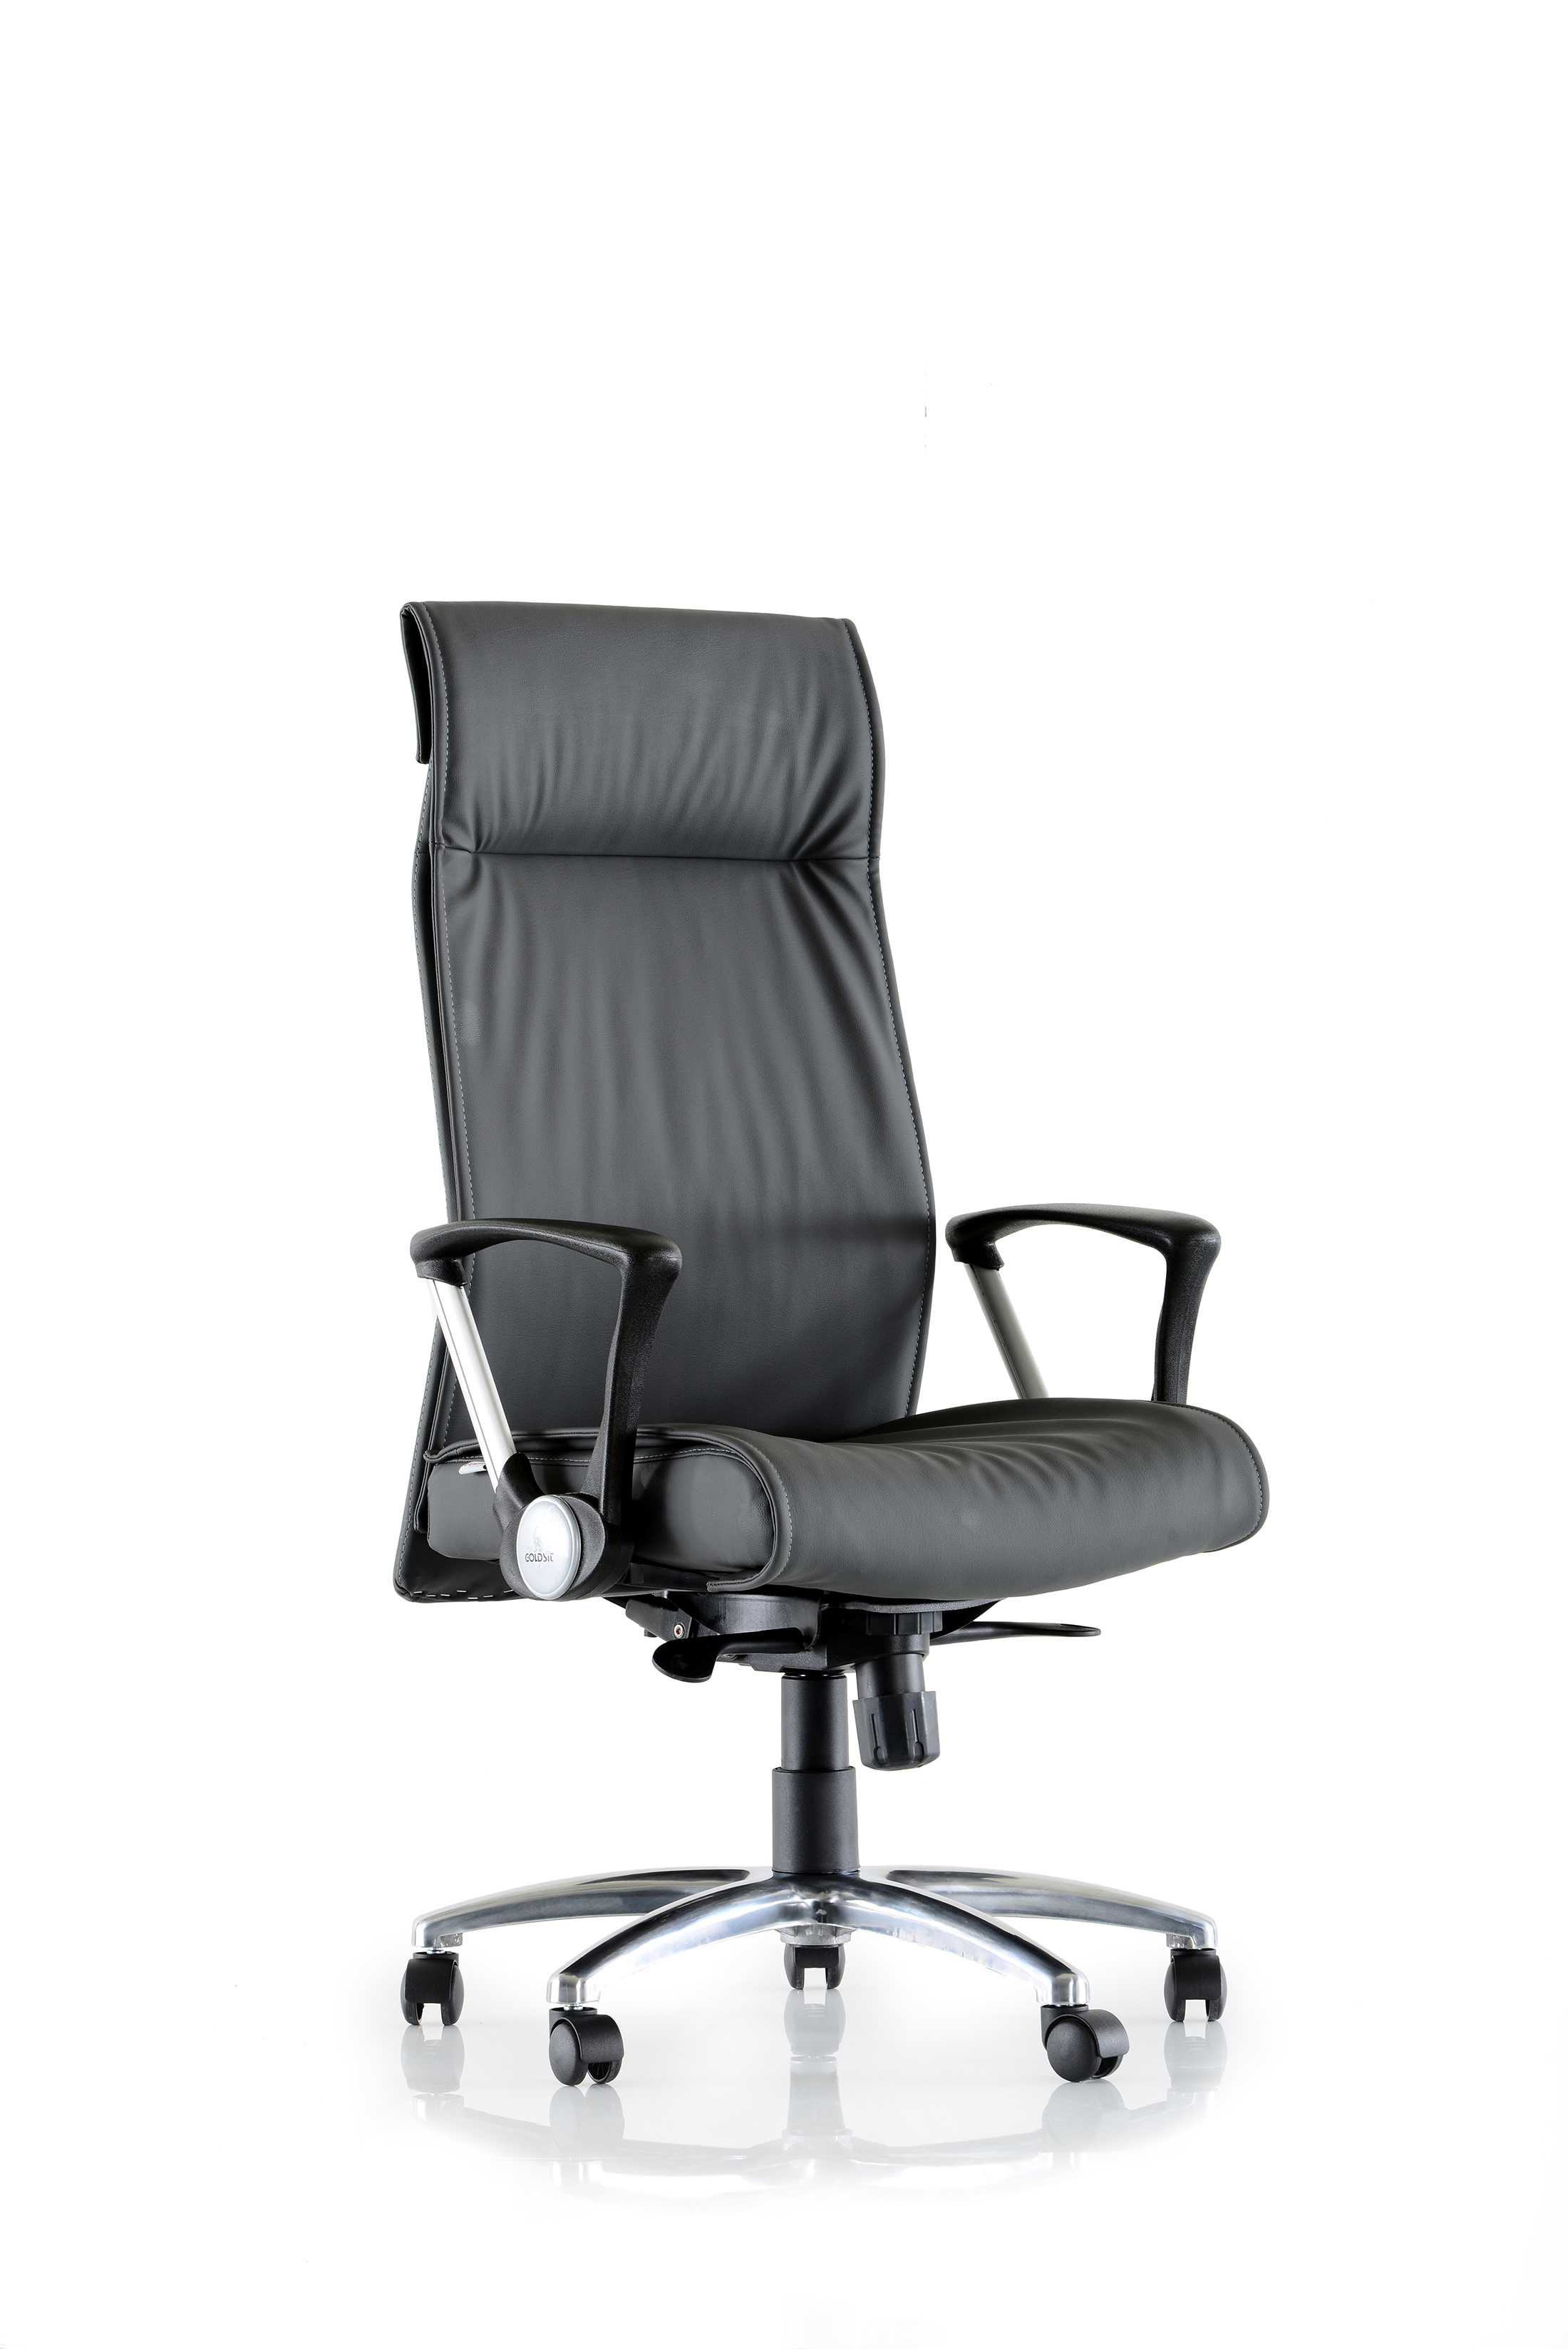 ULTIMA 000C MANAGER CHAIR